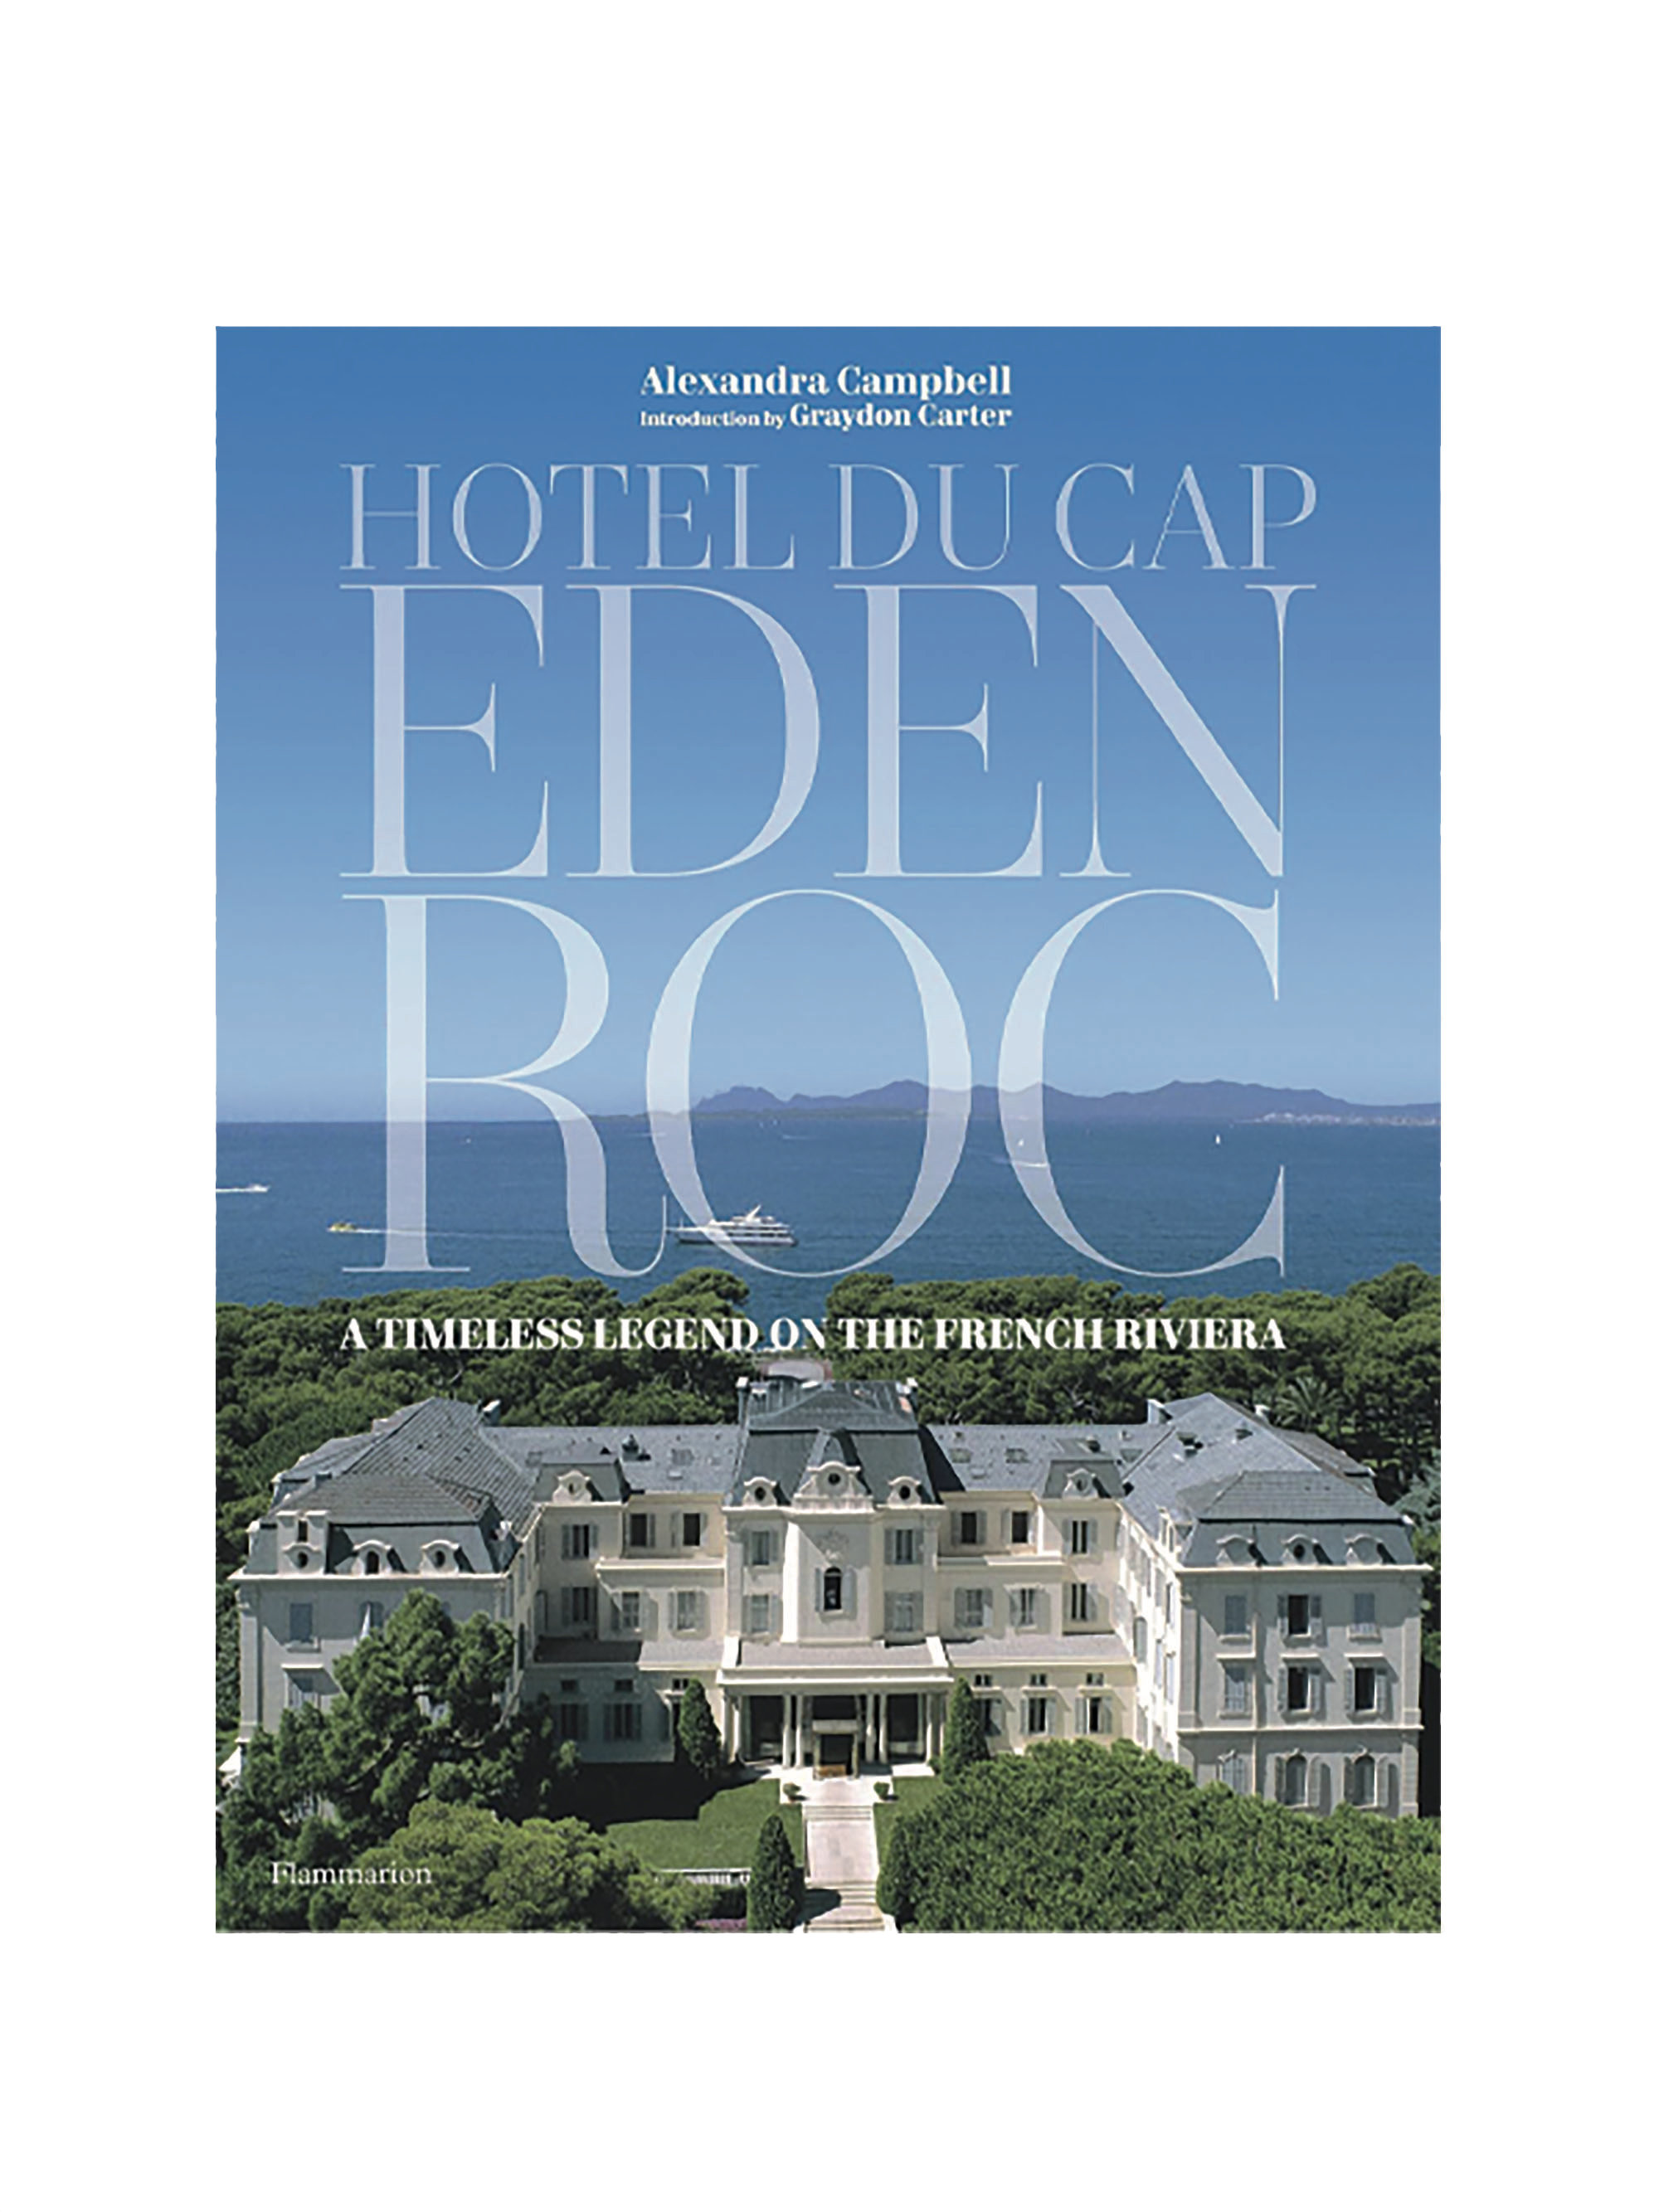 Hotel du Cap: A Timeless Legend on the French Riviera